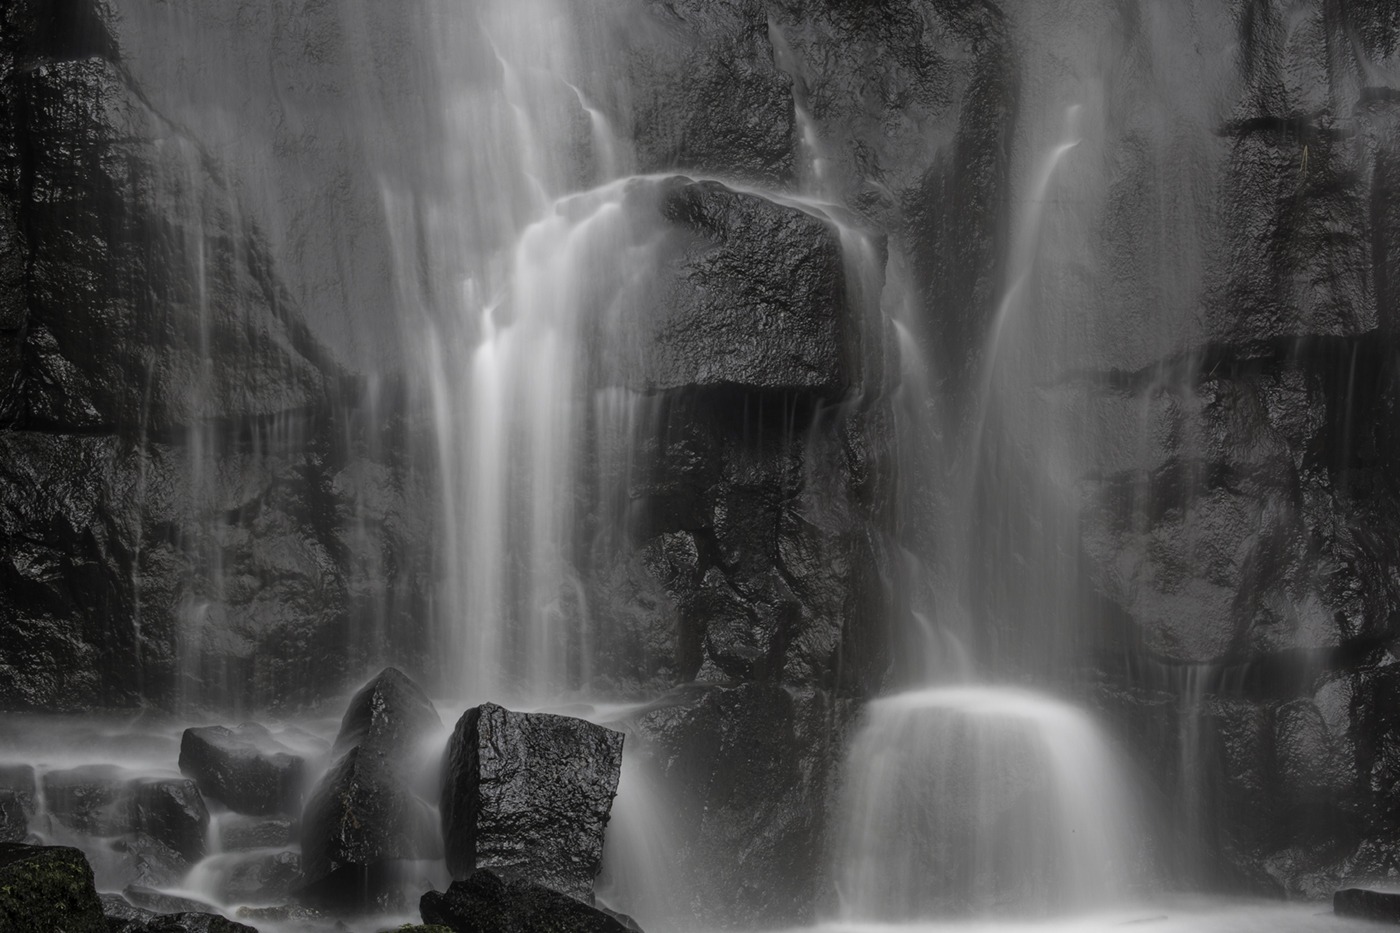 Tony Worobiec: The Intimate Landscape - Waterfalls (Part 6)